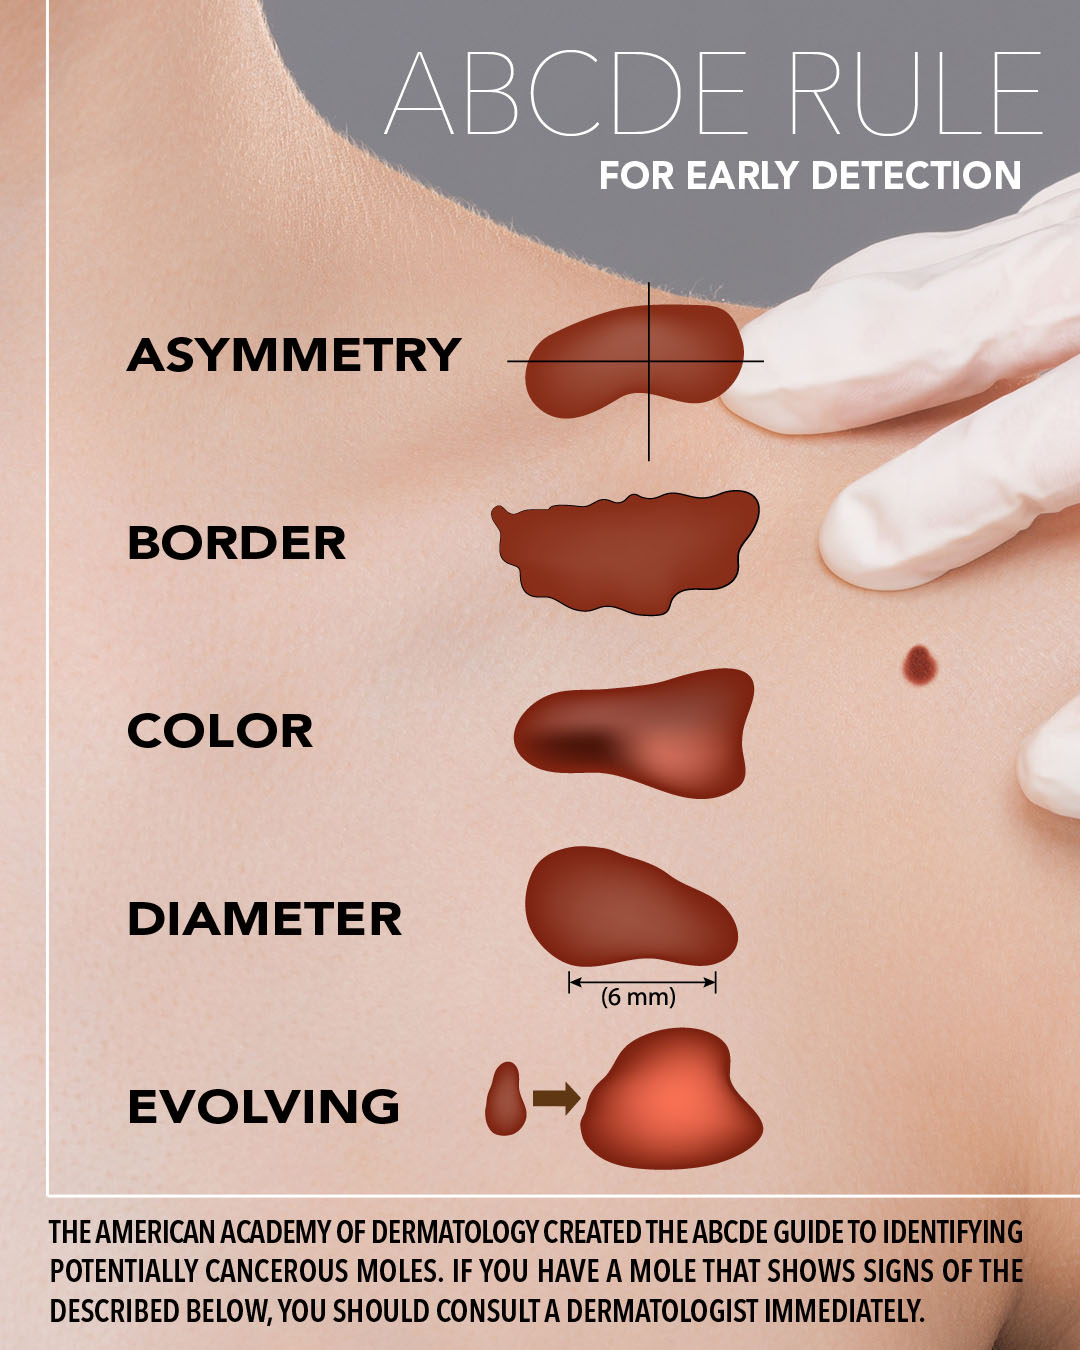 Follow the ABCDE Rule for early skin cancer detection